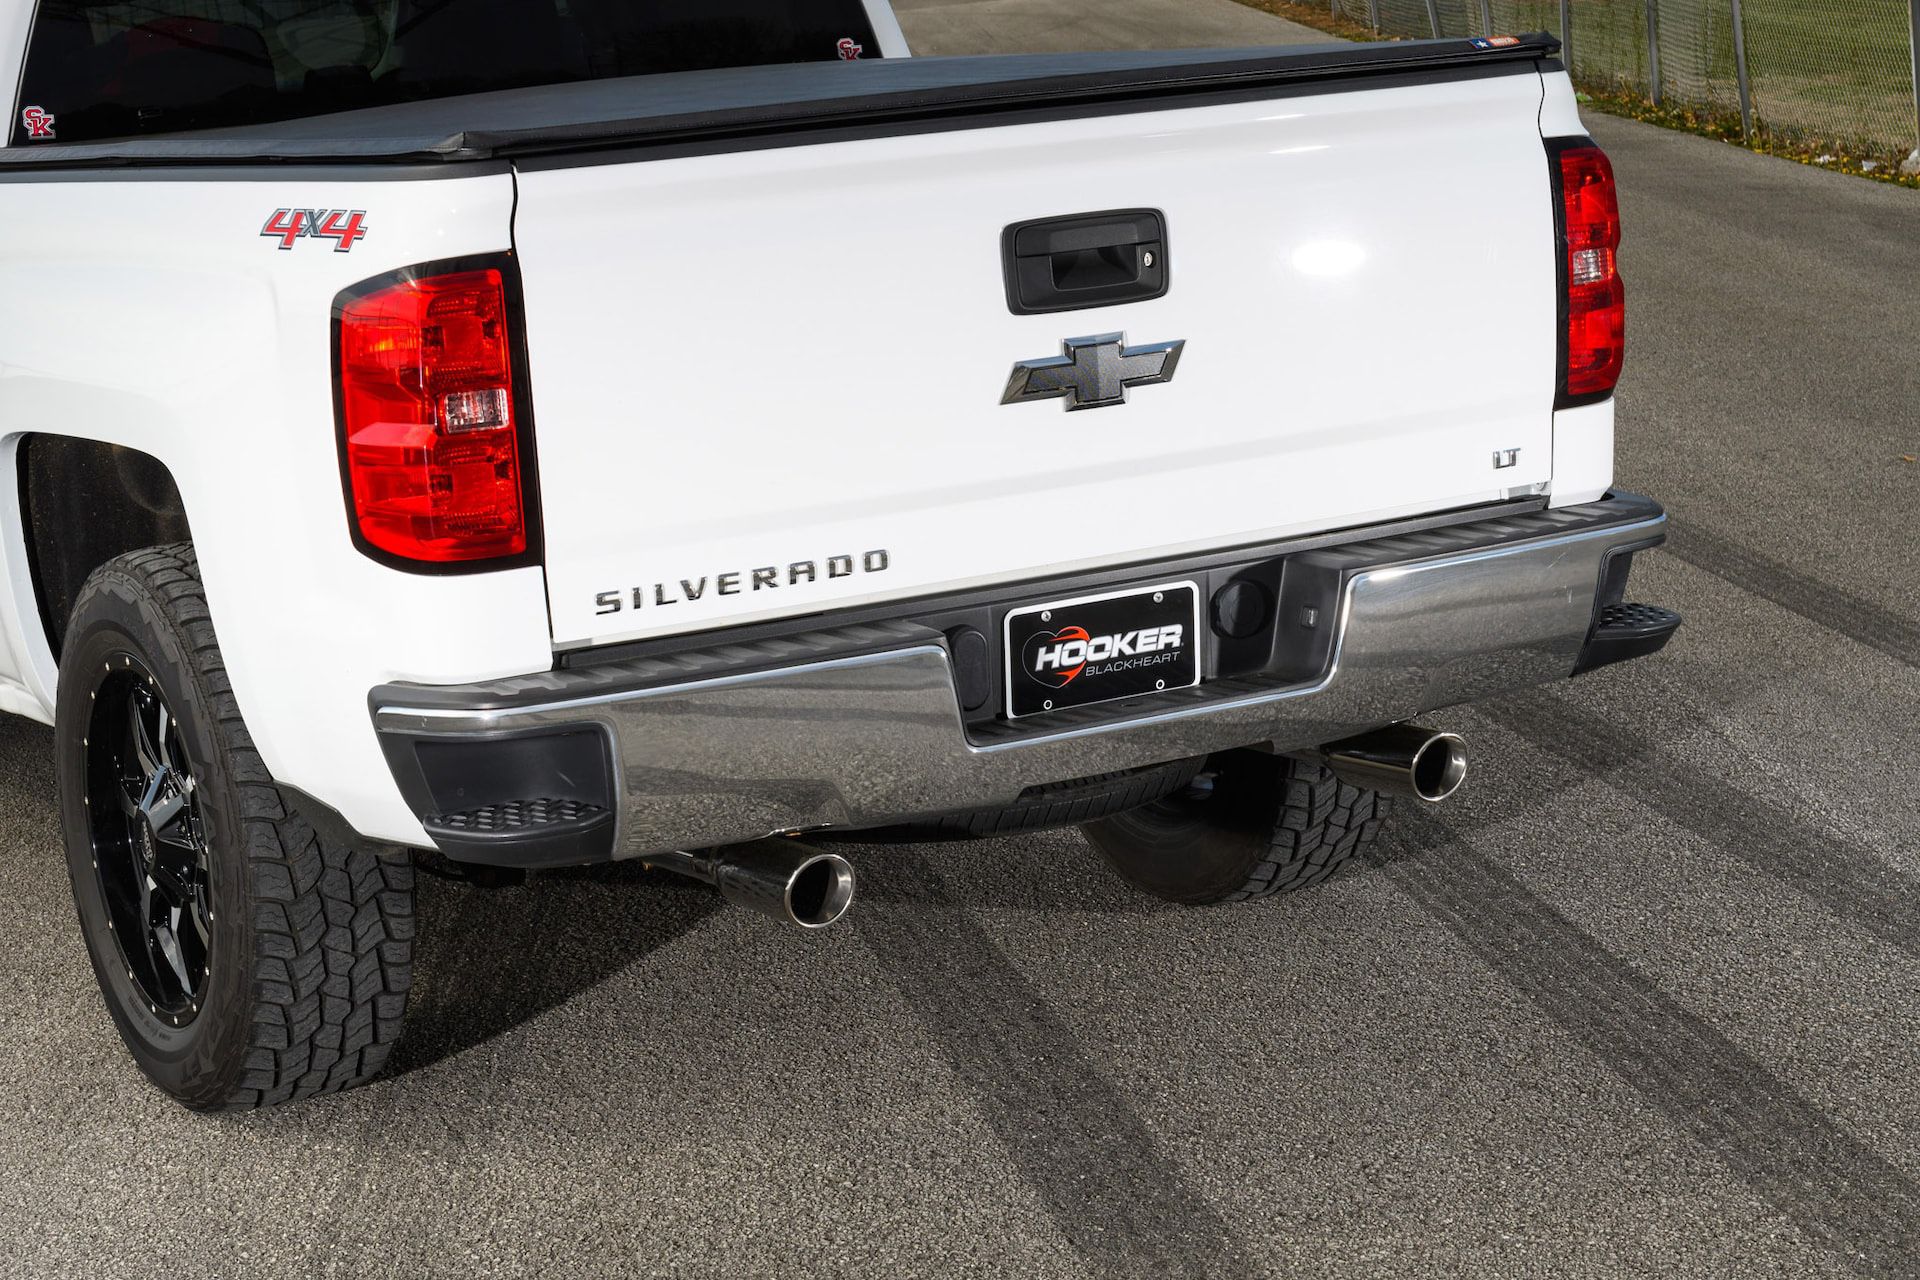 2007-2013 Chevy Silverado 1500 & GMC Sierra 1500 Cat-Back - STAINLESS STEEL - Polished tips - Exhaust System